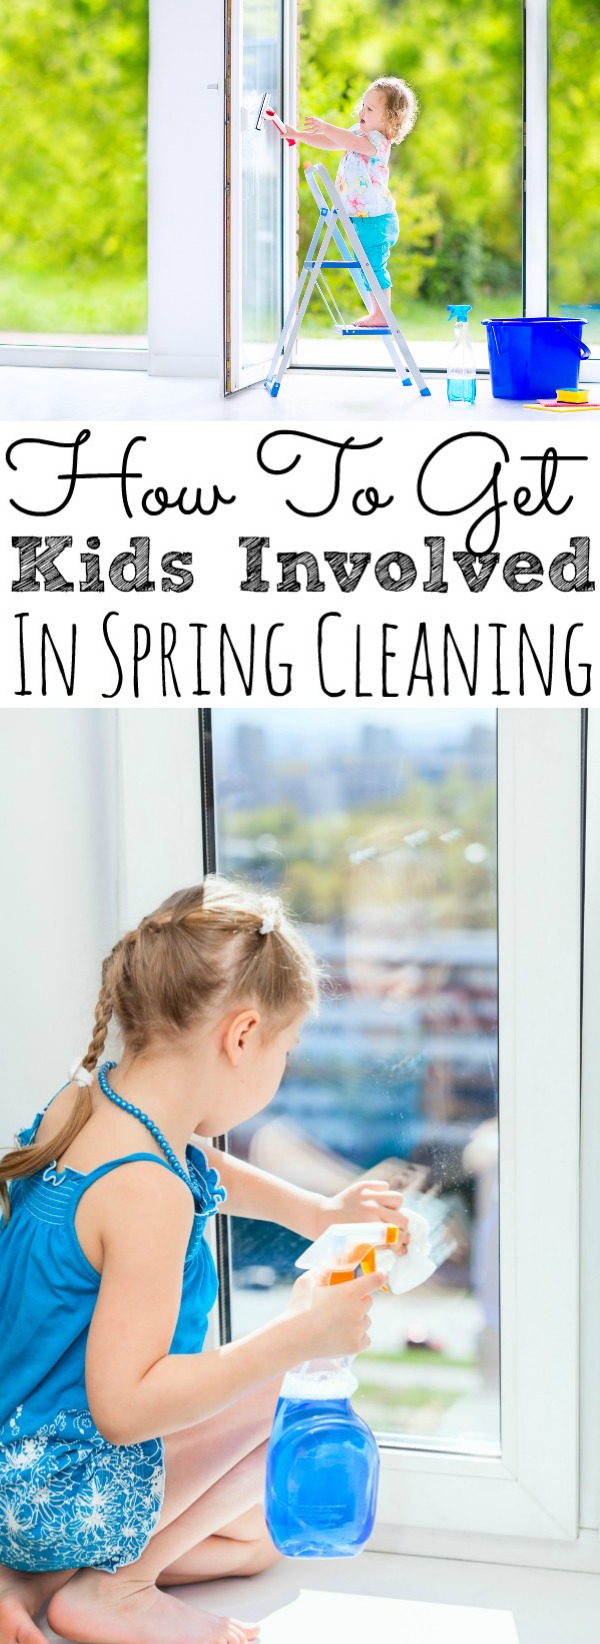 How To Get Kids Involved With House Cleaning